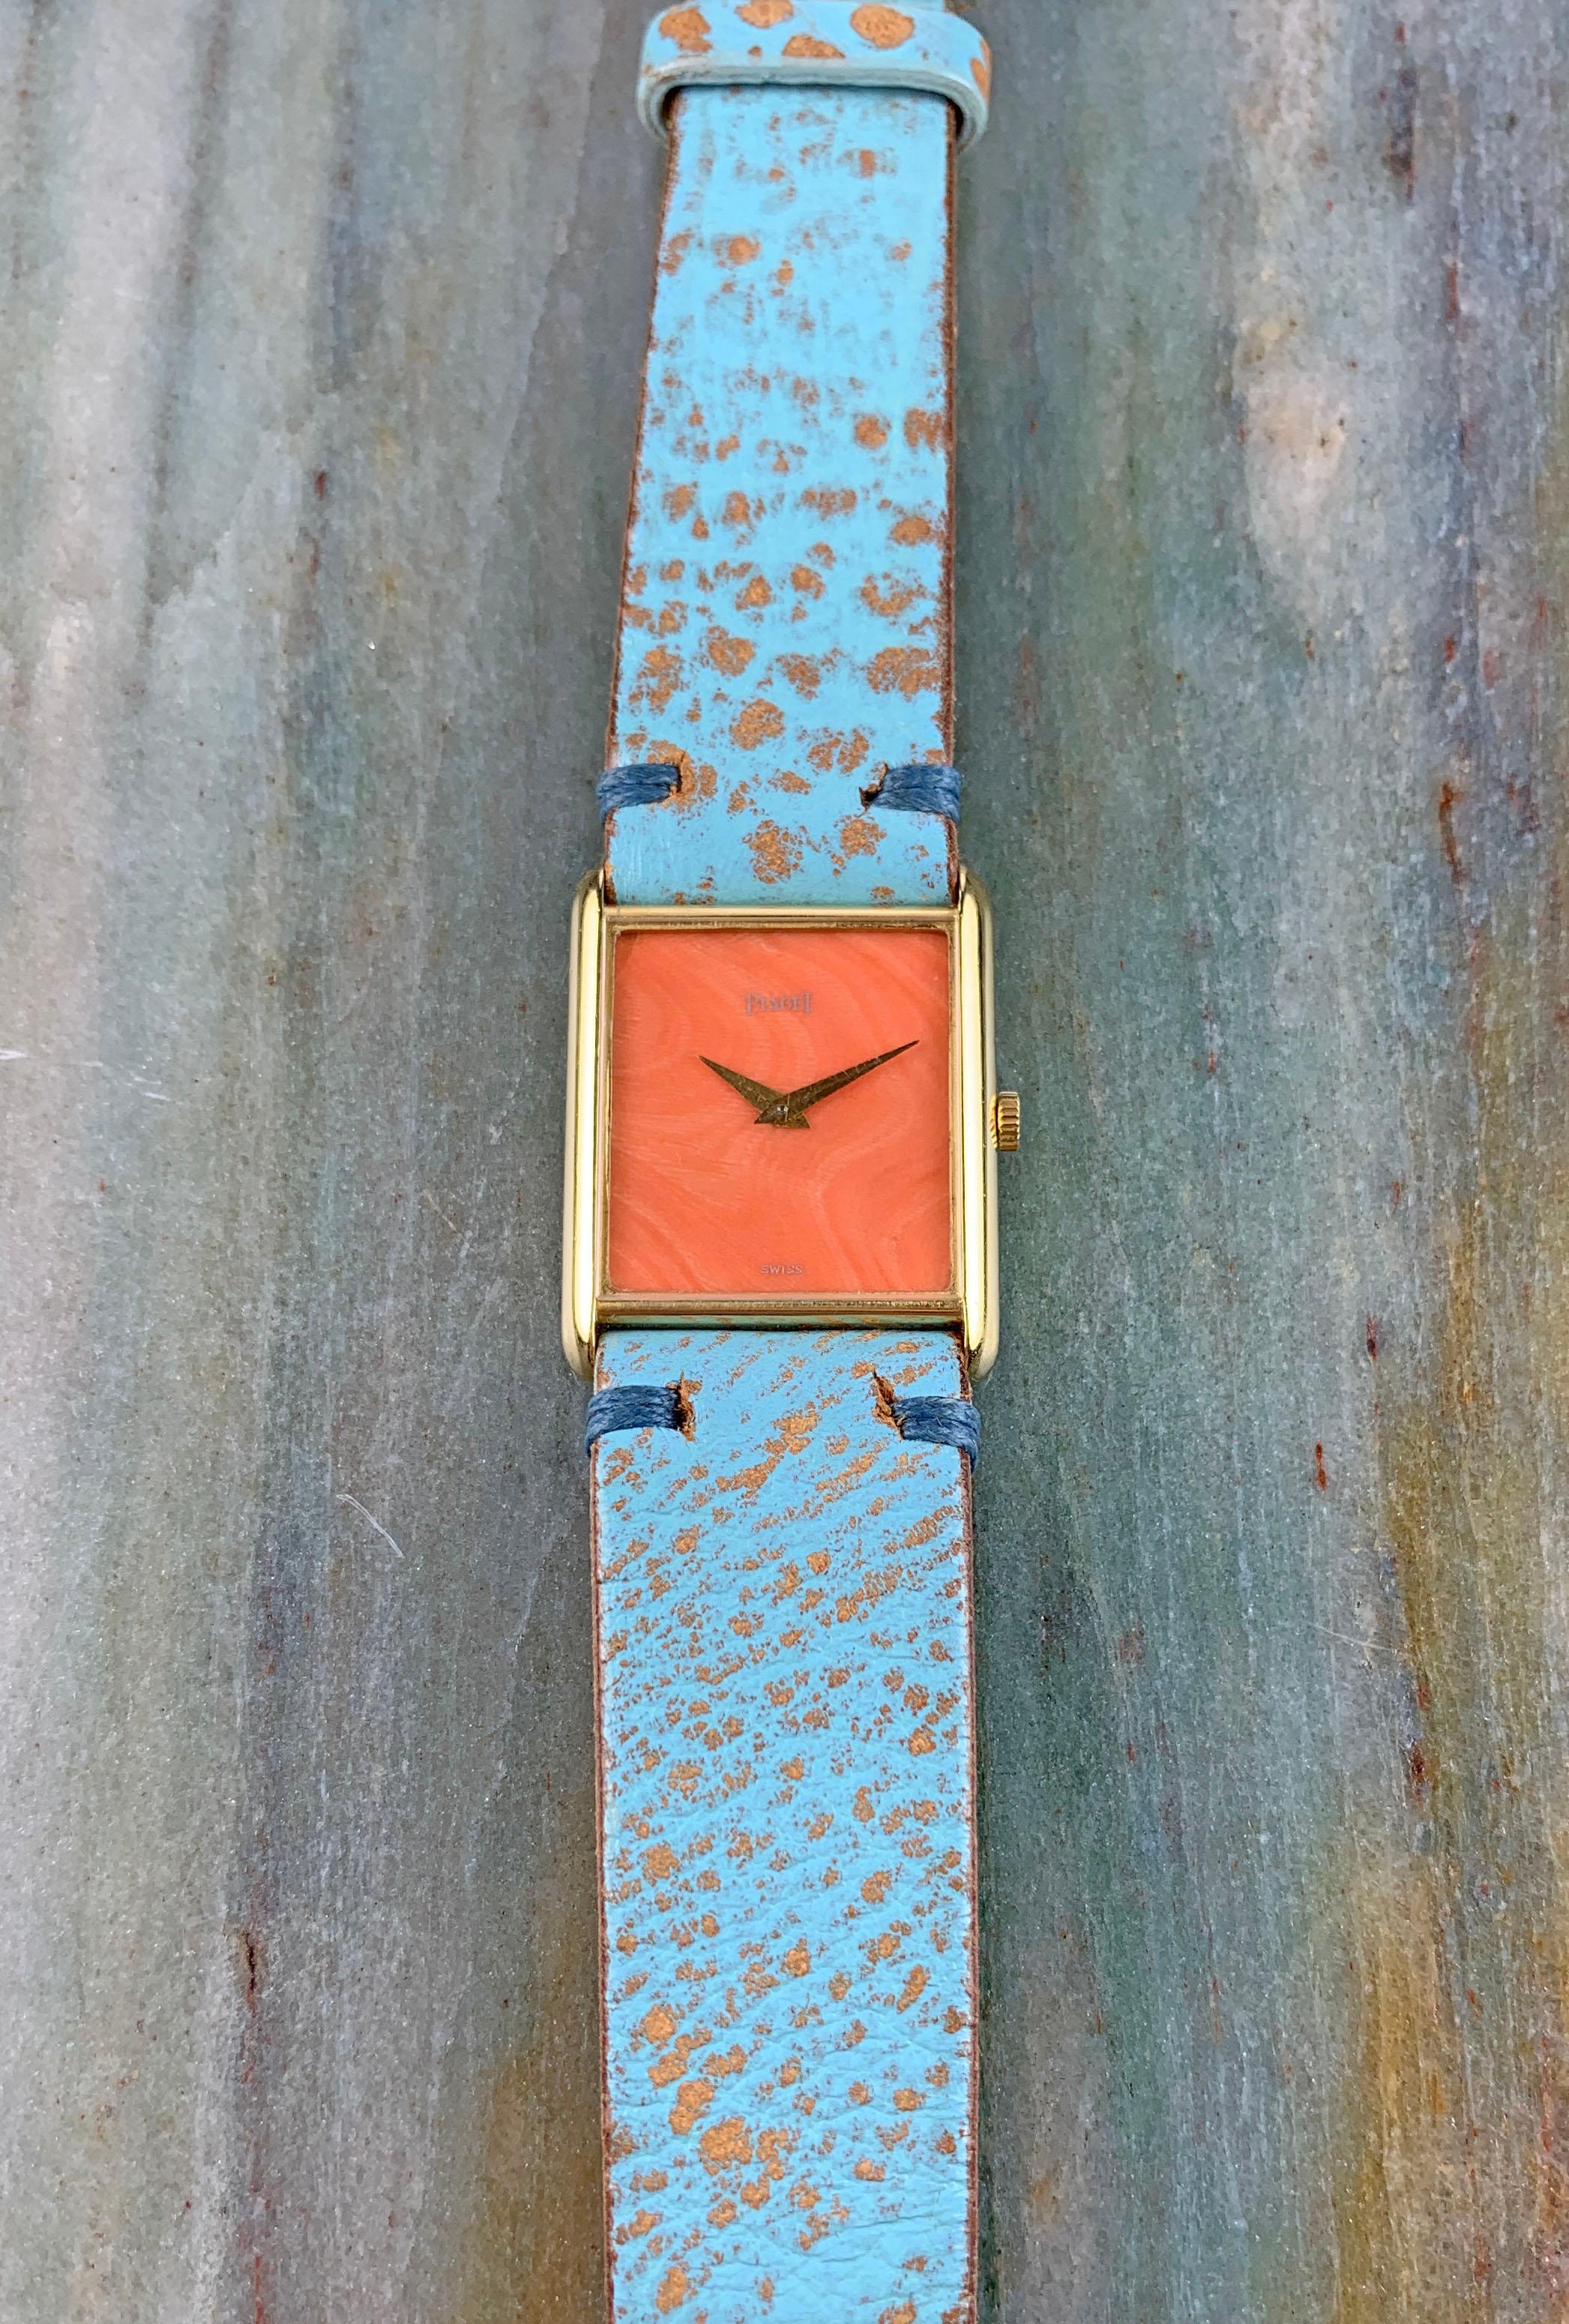 Piaget 18K Yellow Gold Manual Wind Tank Watch
Factory Piaget Coral Dial
Signed and Engraved Case-Back
18K Yellow Gold Case
20mm x 25mm
Fitted on a Custom Handmade Leather Strap
One Year Warranty on Movement and Parts and Letter of Authenticity